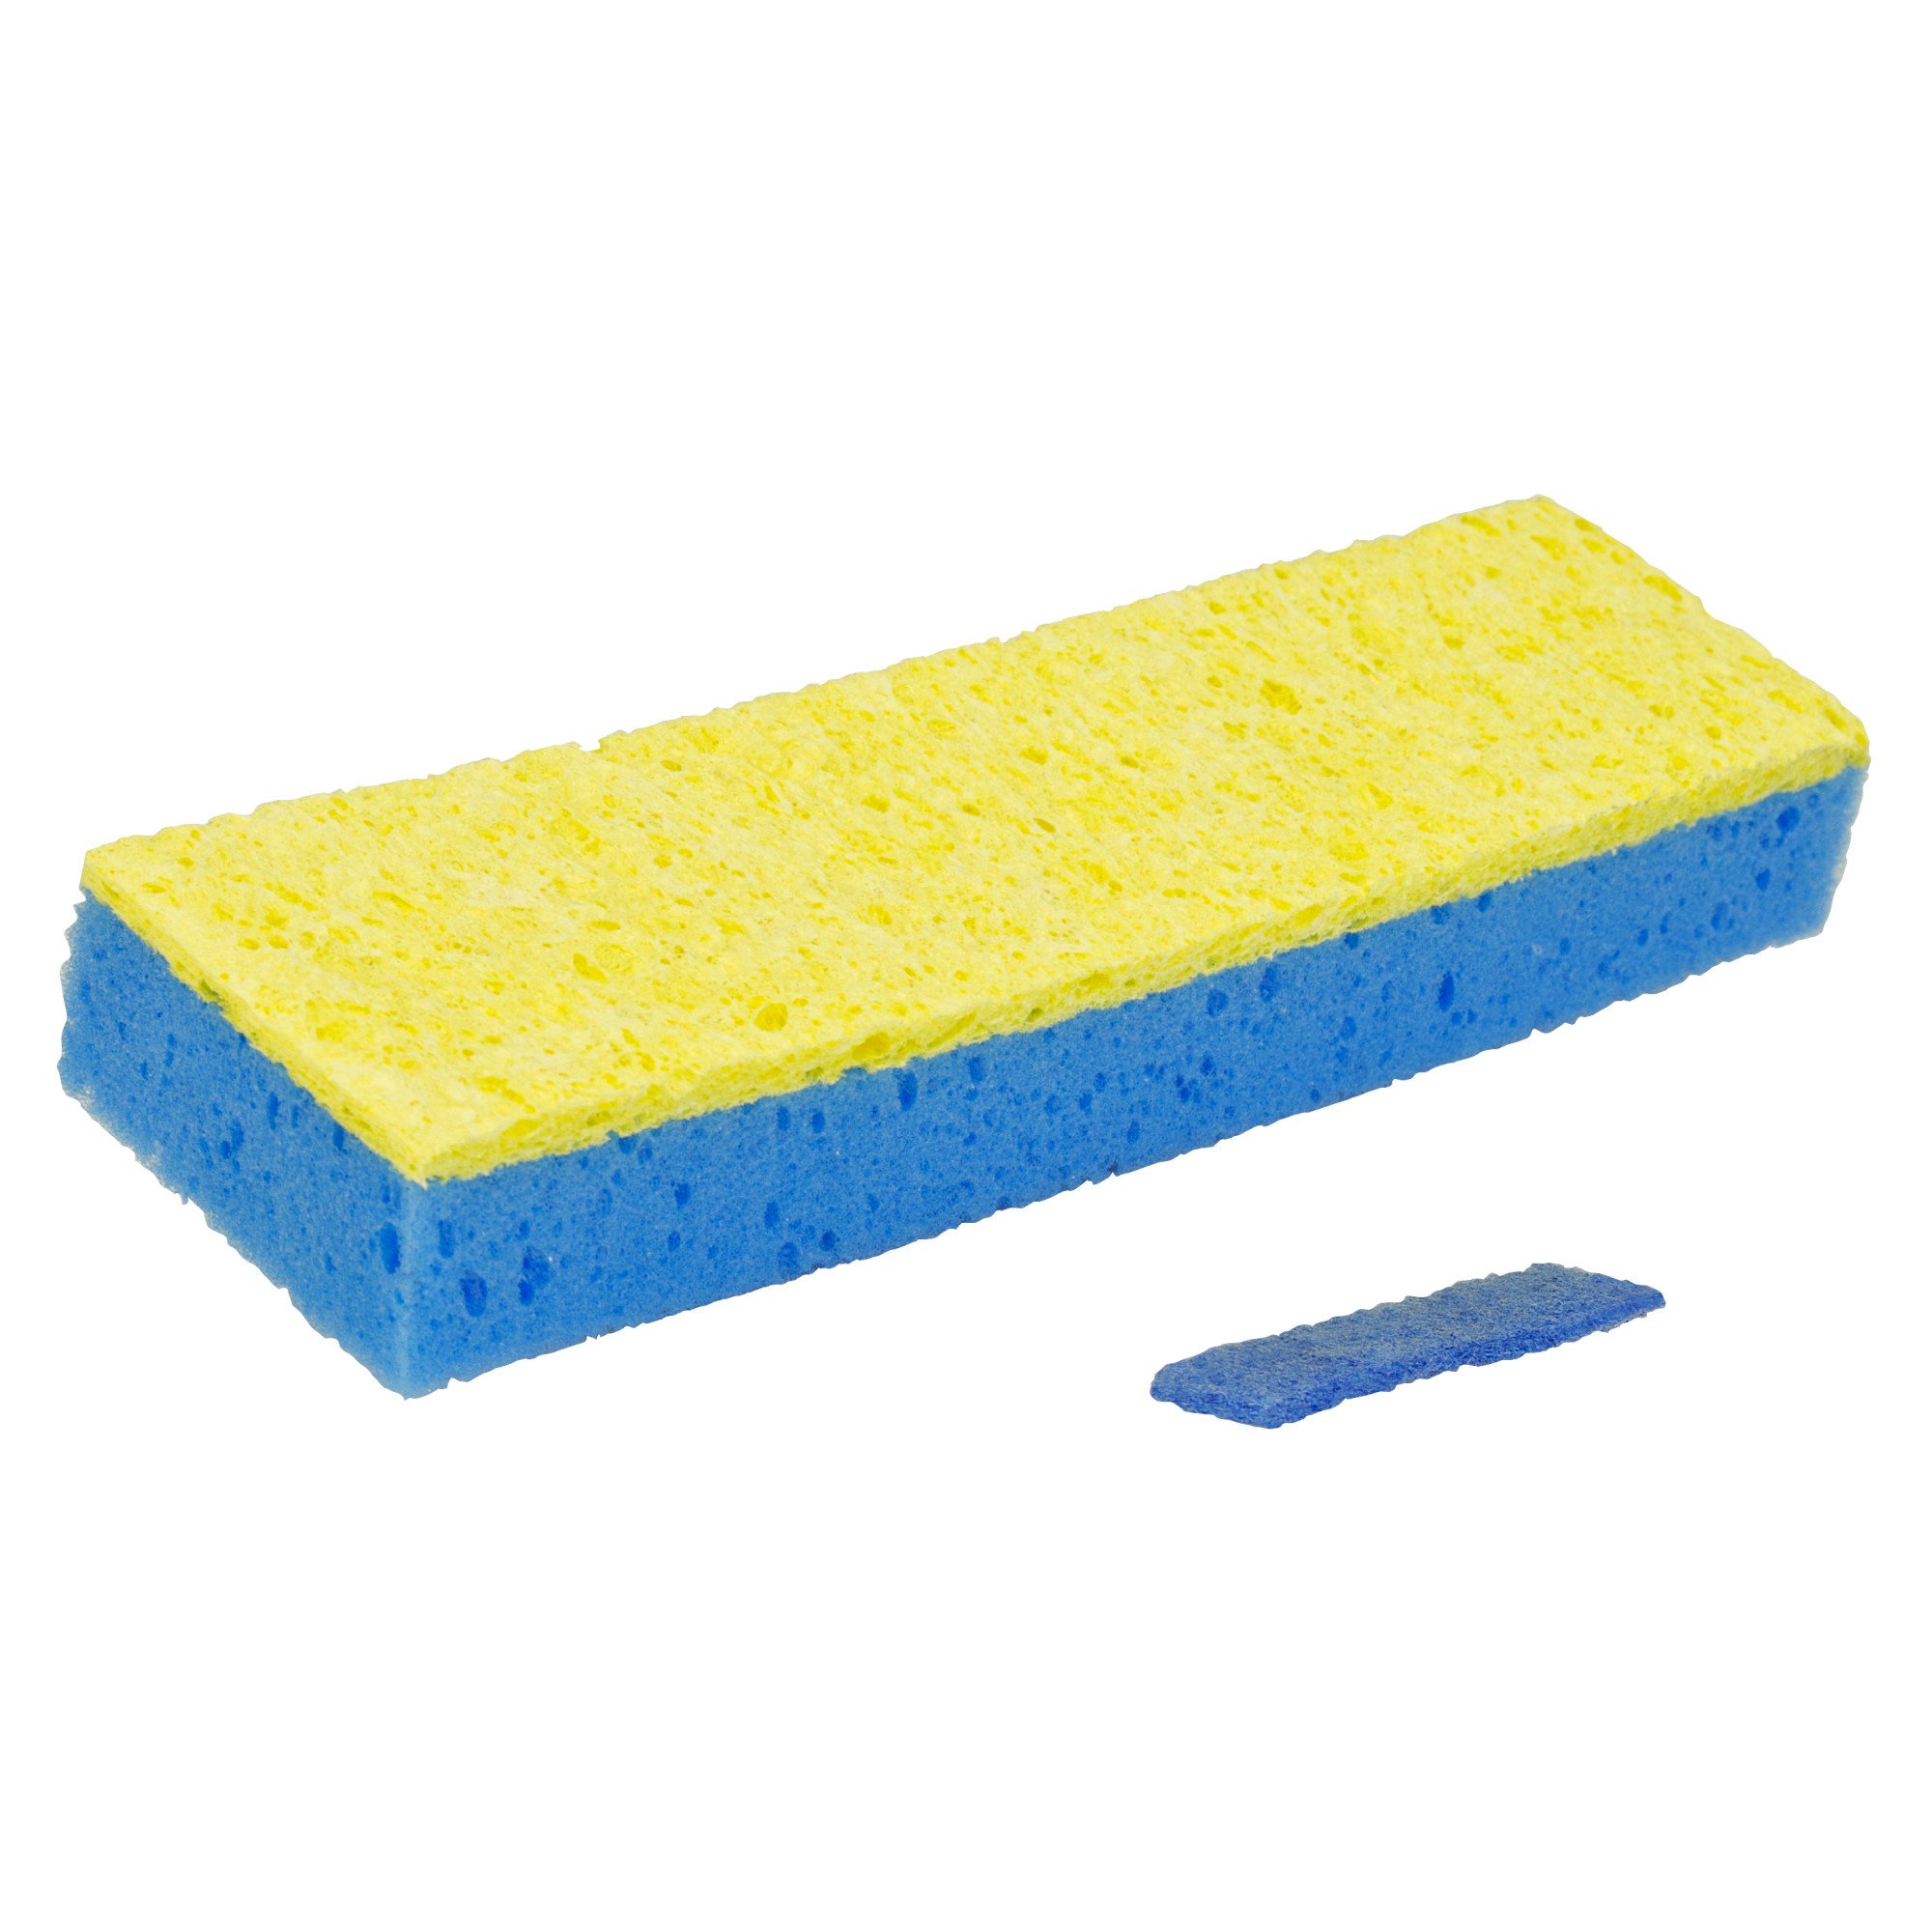 Quickie Type S Mop Refill Clean Squeeze Sponge Fits 045-4 045on 045hpm Mops Blue 